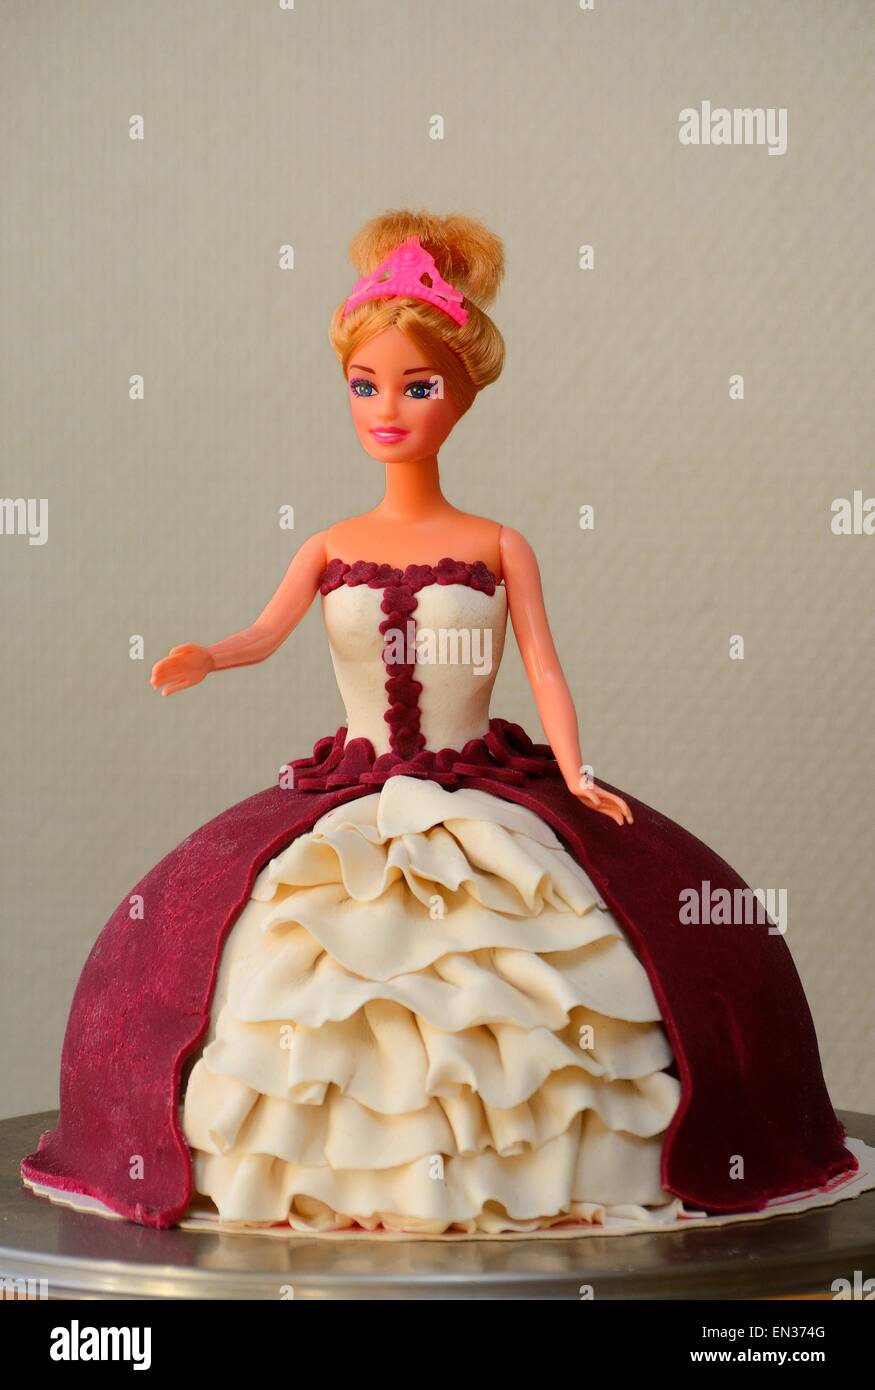 A princess cake moulded on to a Barbie doll, Möllers Bakery, Ystad, Sweden  Stock Photo - Alamy